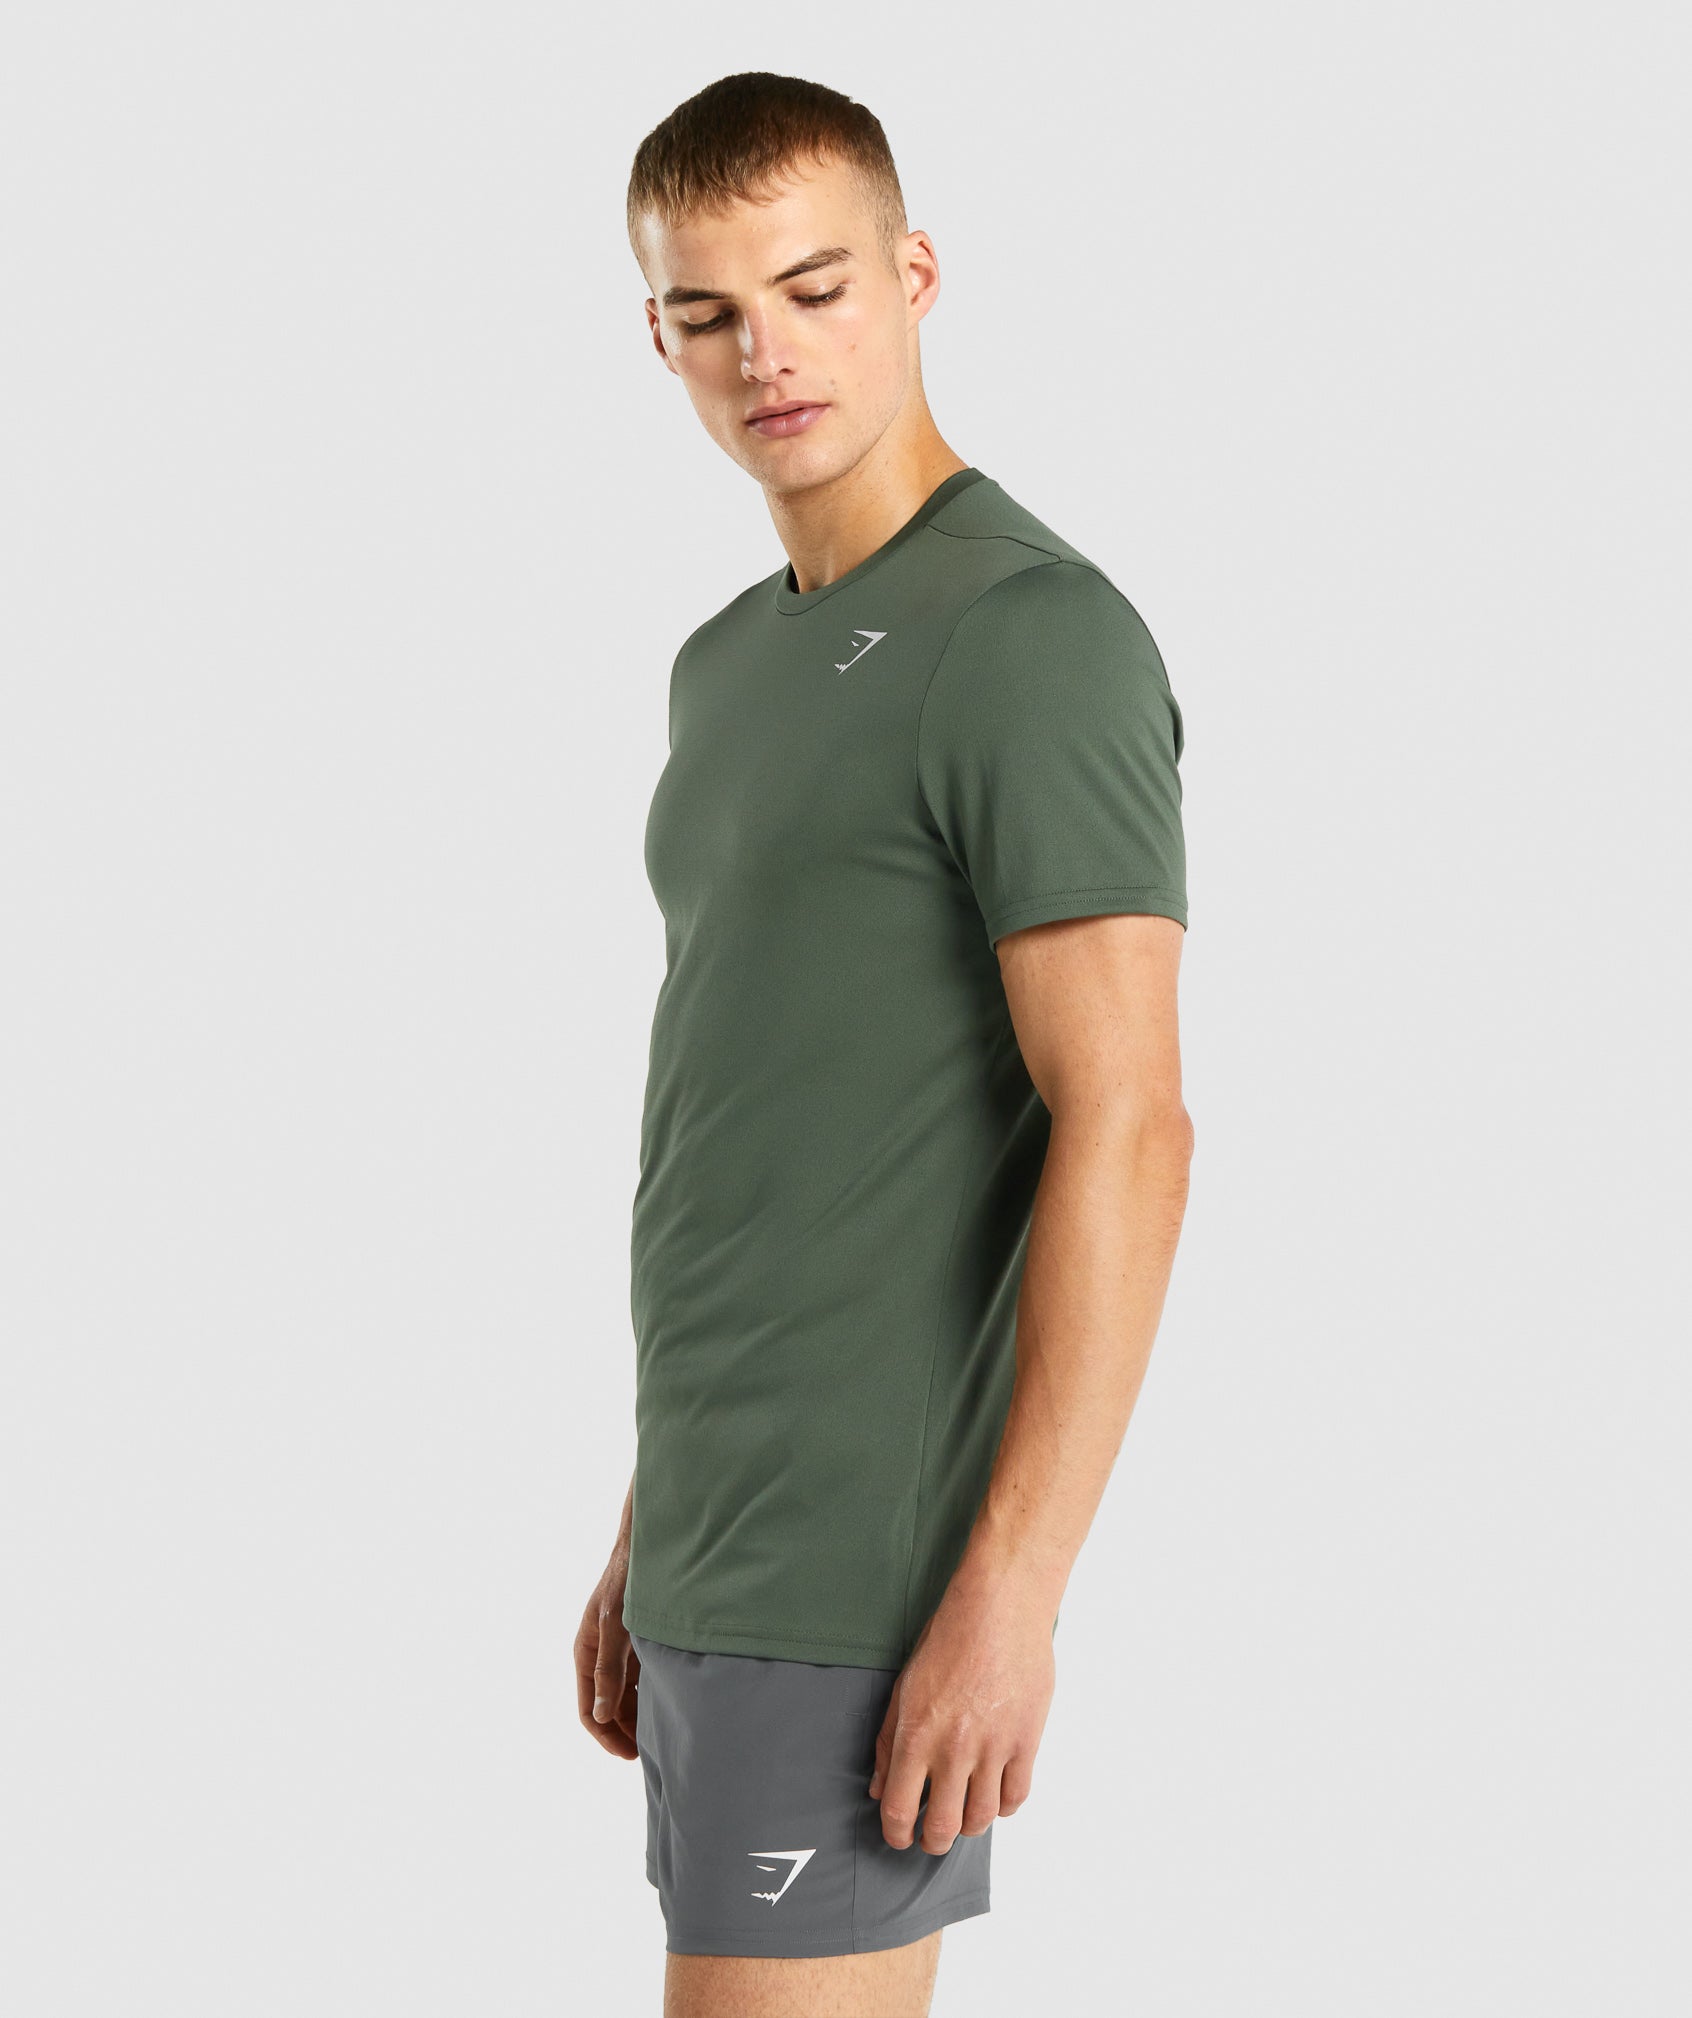 Arrival T-Shirt in Green